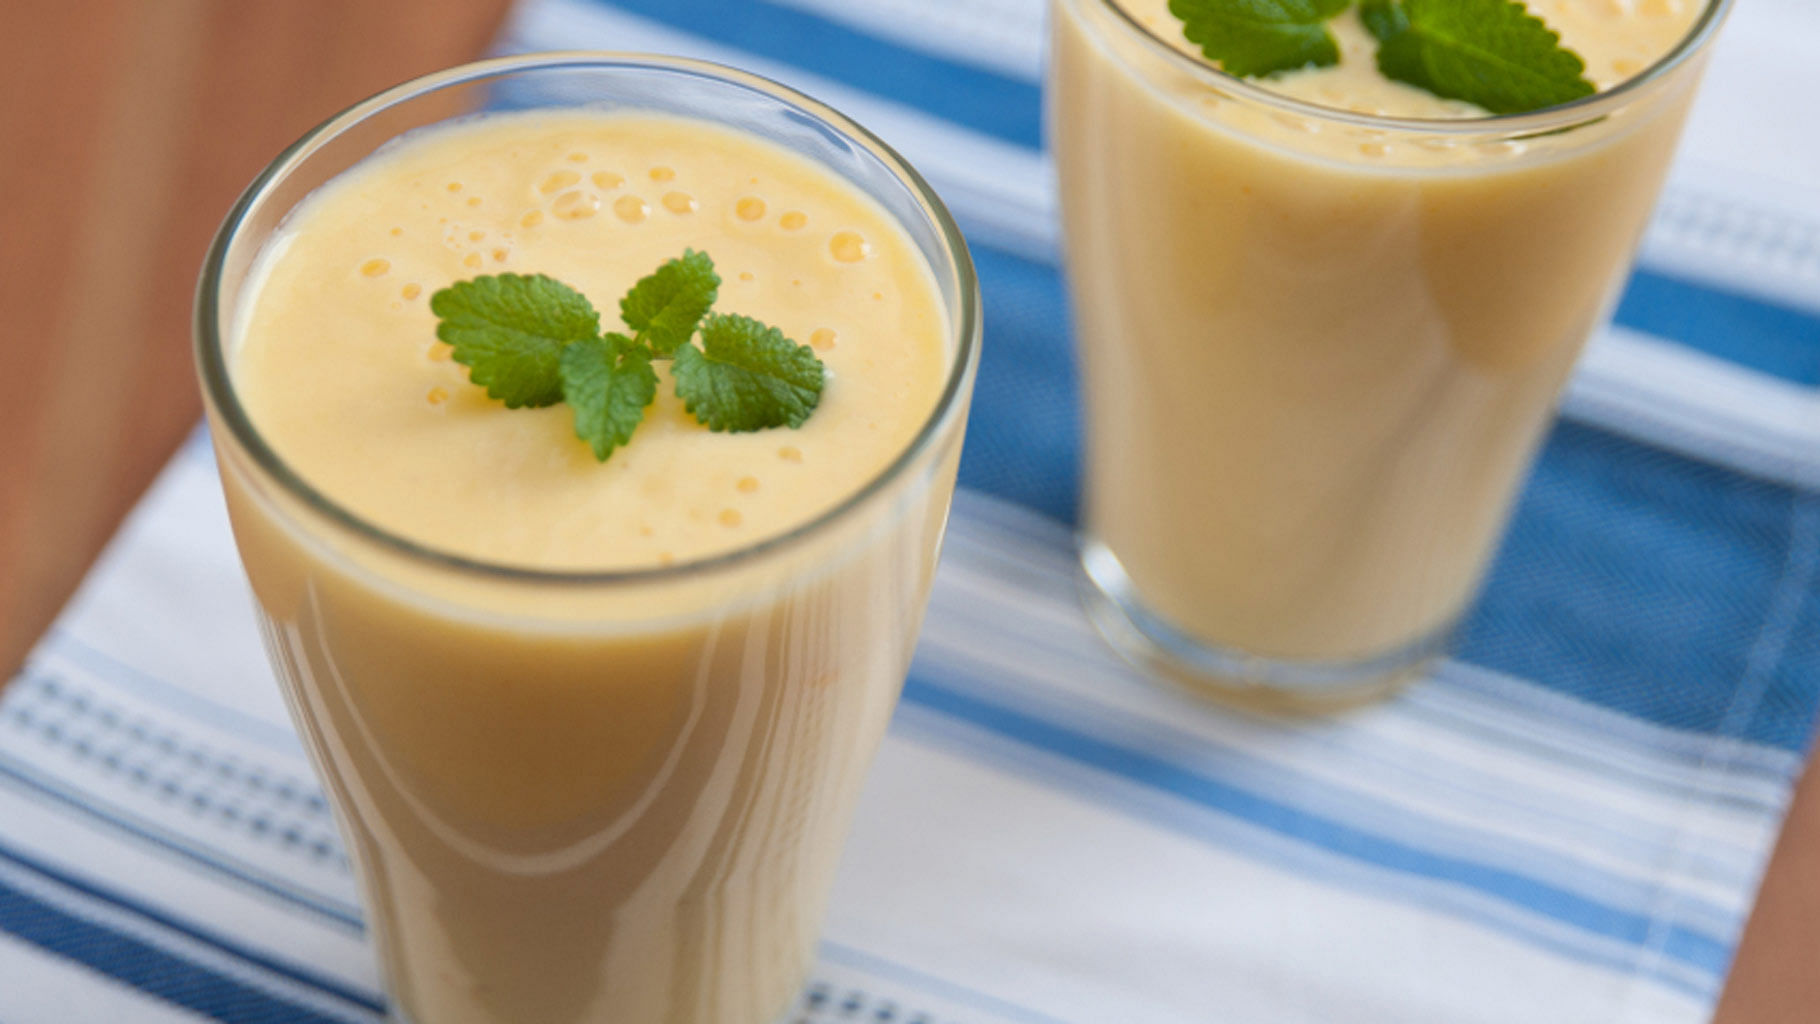 

With the ‘Subodham’ initiative, the Kerala government plans to promote these “Magic drinks” against alcoholism and substance abuse. (Photo: iStockphoto)